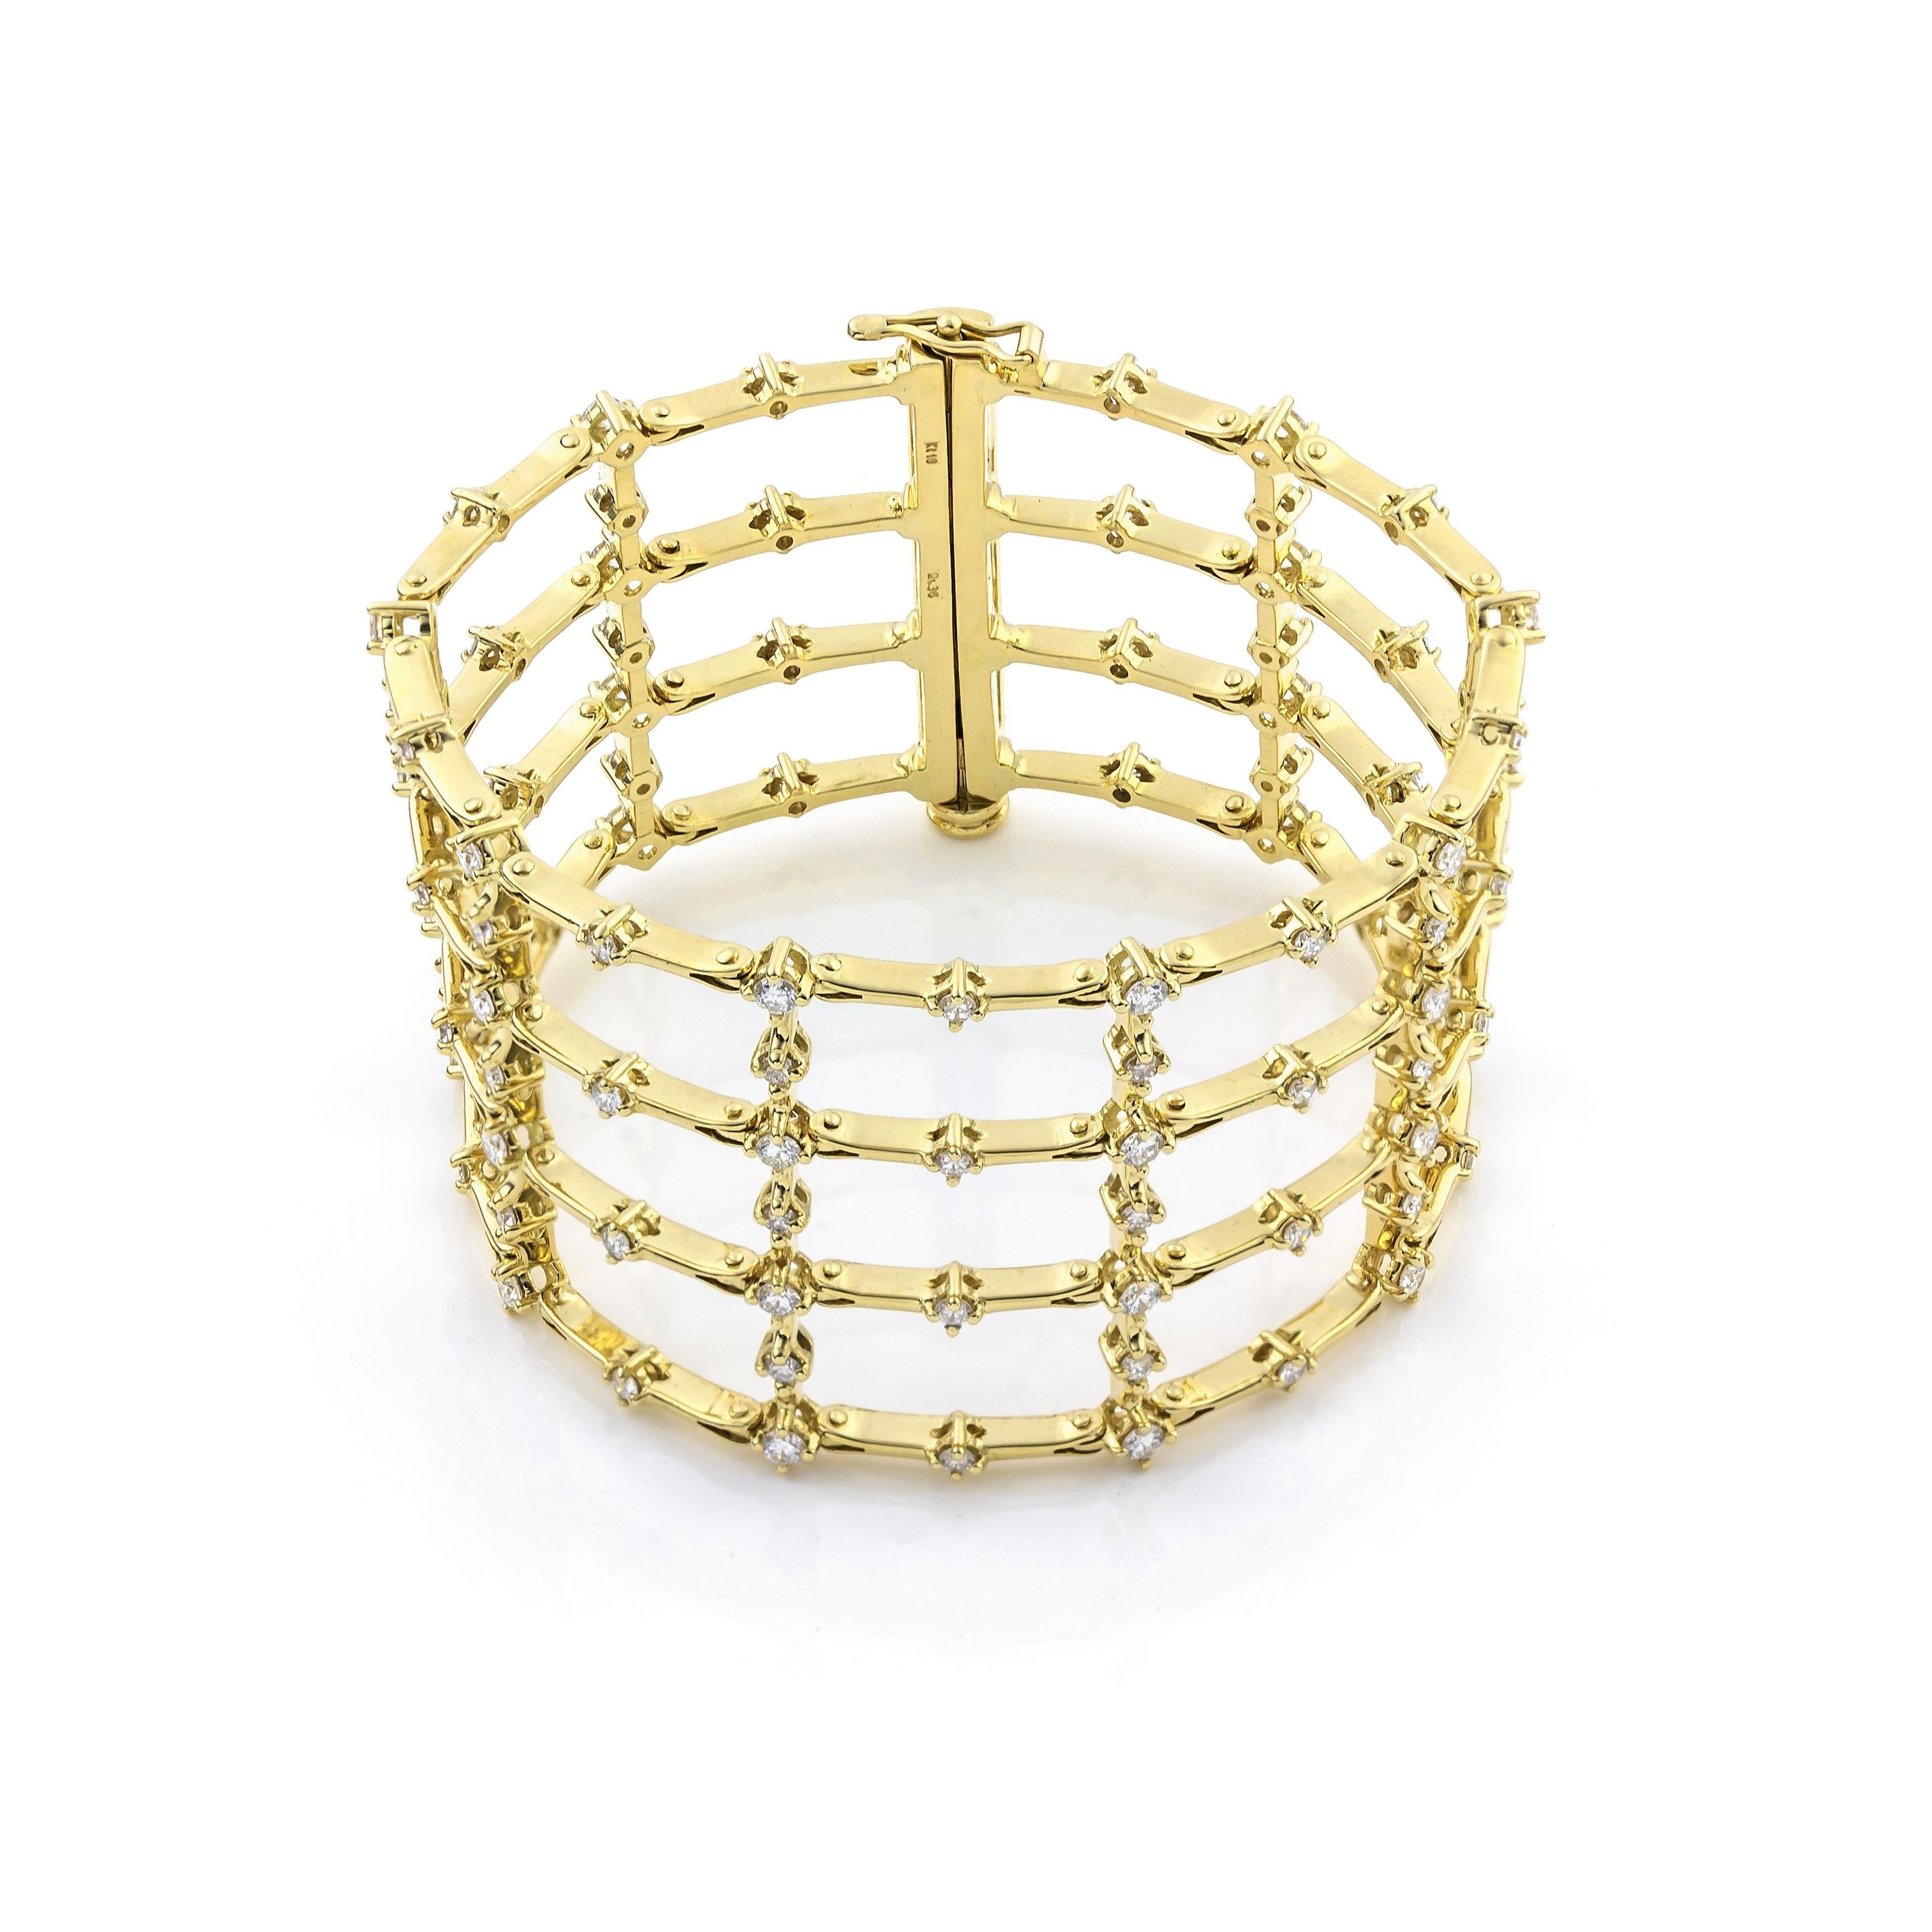 Big Cuff Bracelet in 18Kt Yellow Gold with  Prong Setting brilliant cut diamonds 5.70 carats, Fence shape 
Cage Cuff bracelet inspired by the garden fence. This unique piece is made of 18Kt yellow gold and brilliant cut diamonds 5.70 ct on its